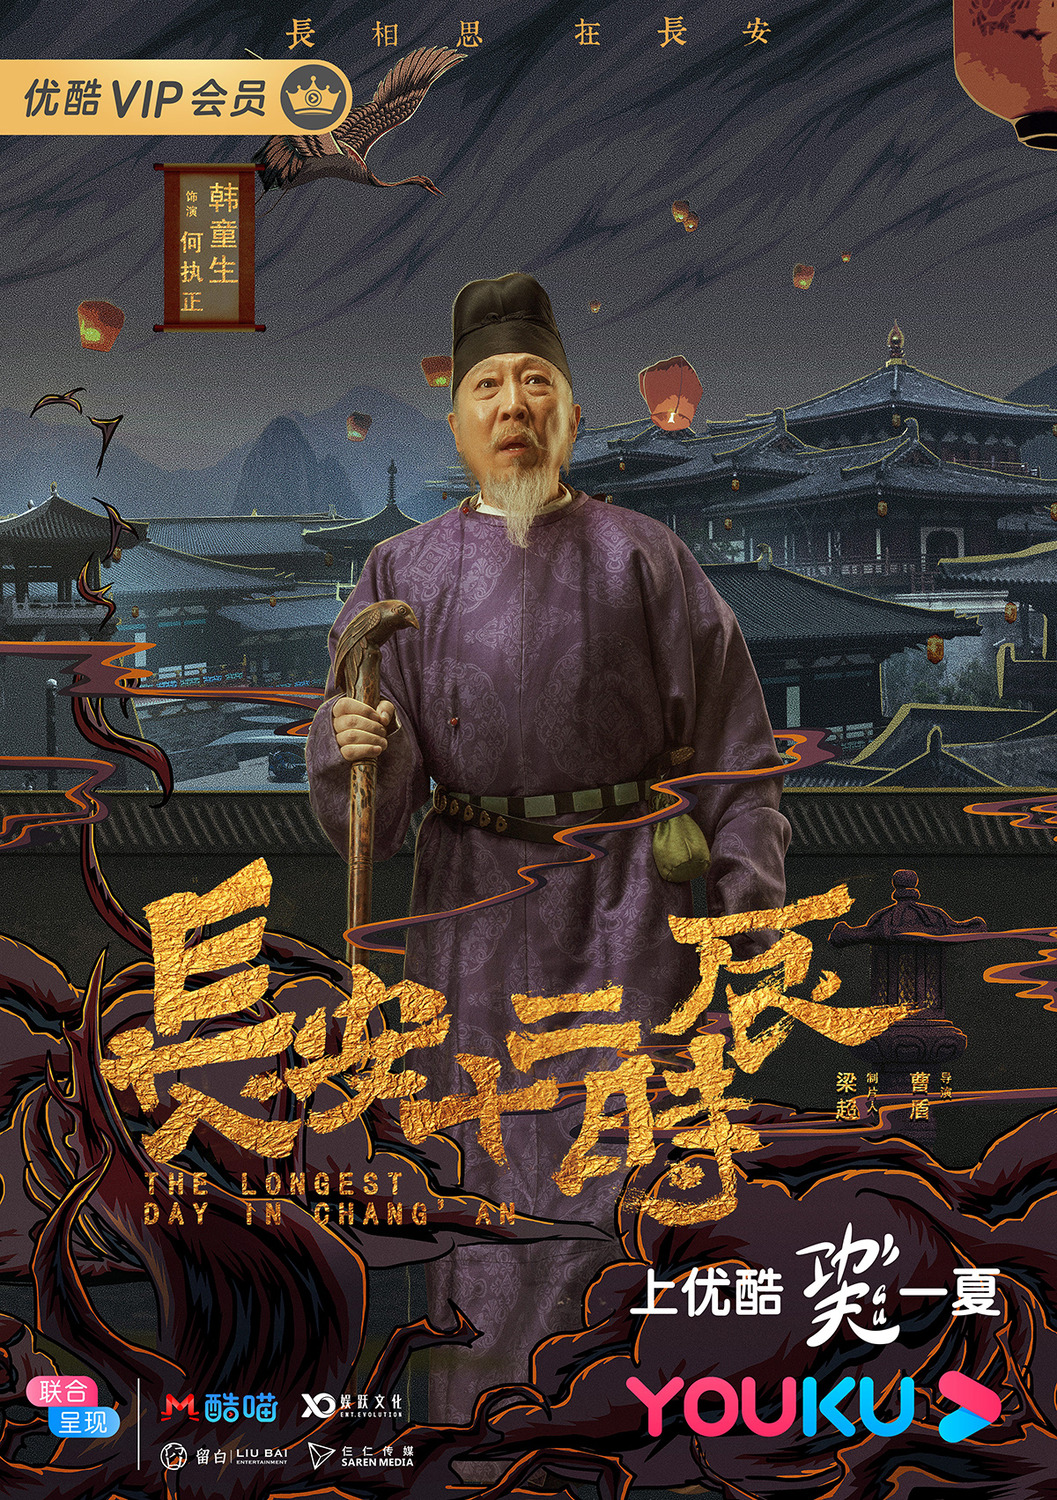 Extra Large TV Poster Image for Chang'an shi er shi chen (#12 of 18)